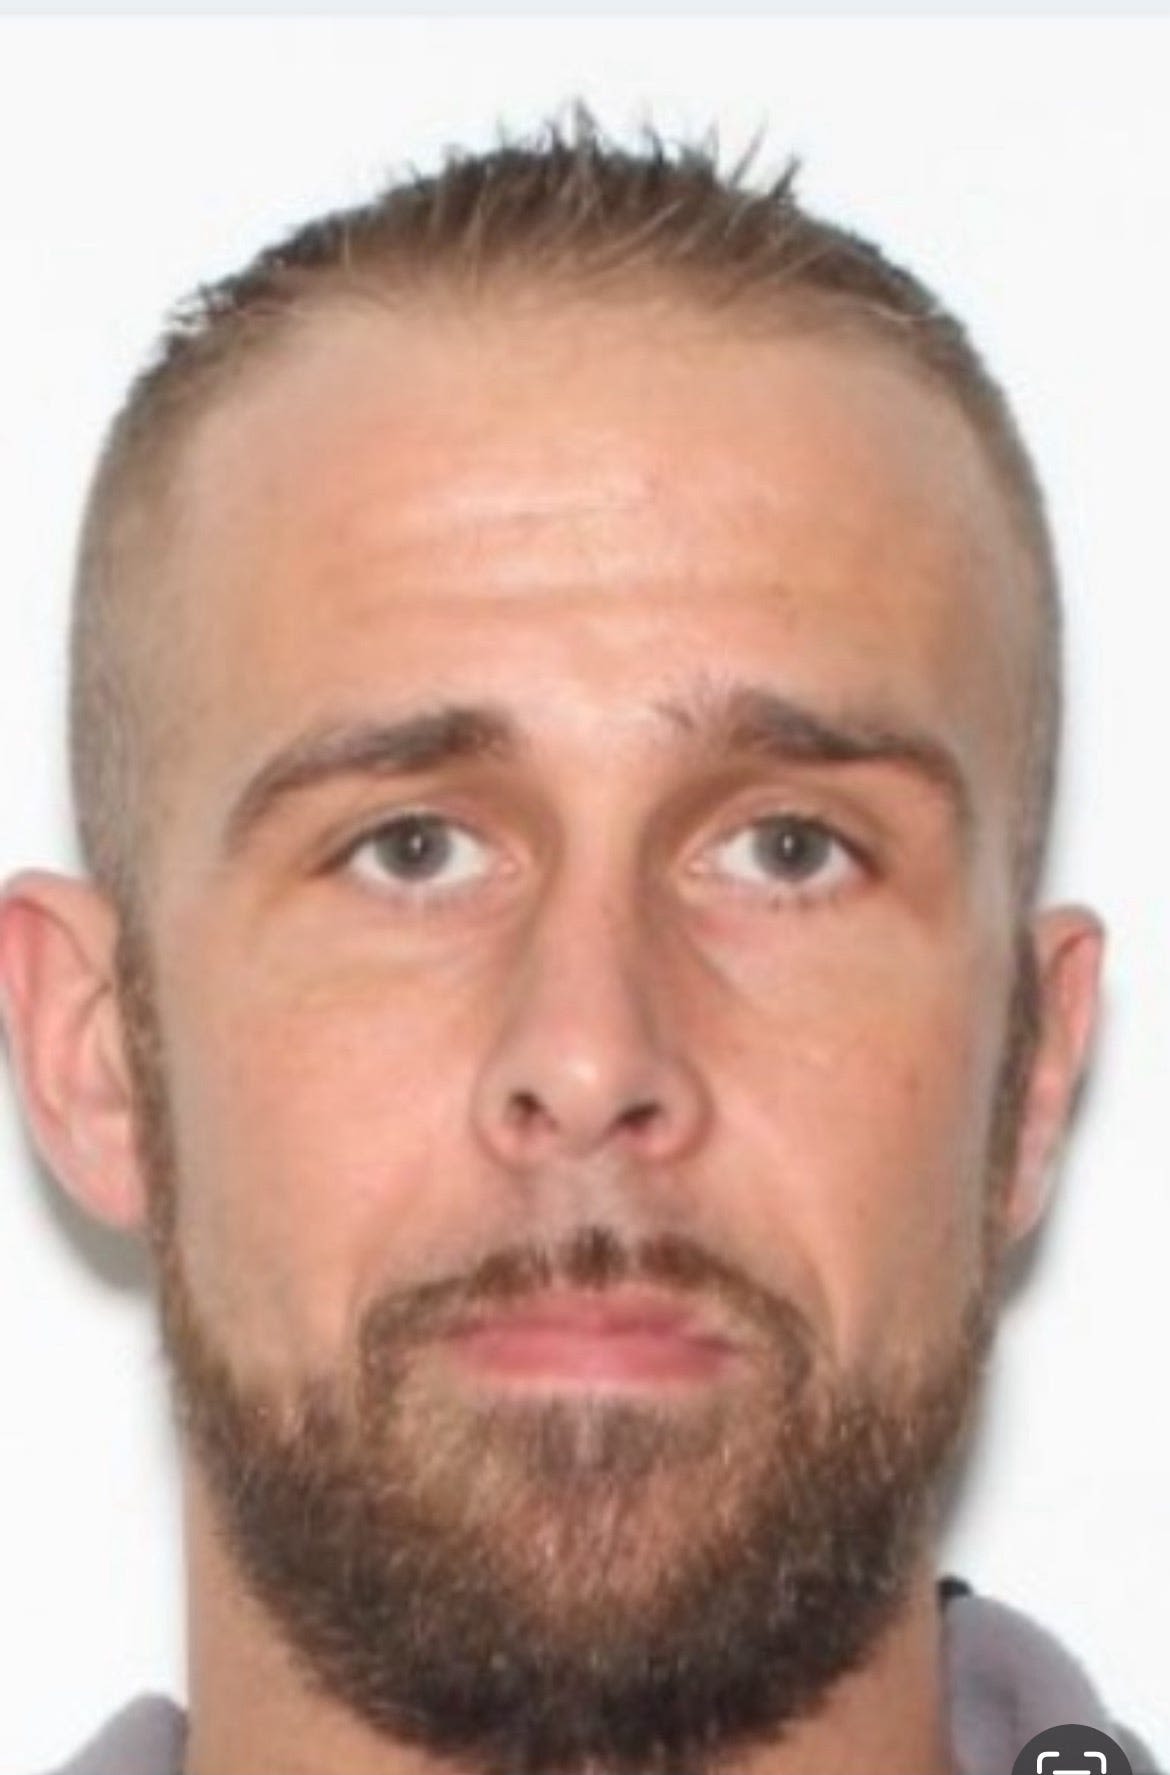 Law enforcement agencies searching for Catlin man wanted in Beaver Dams shooting